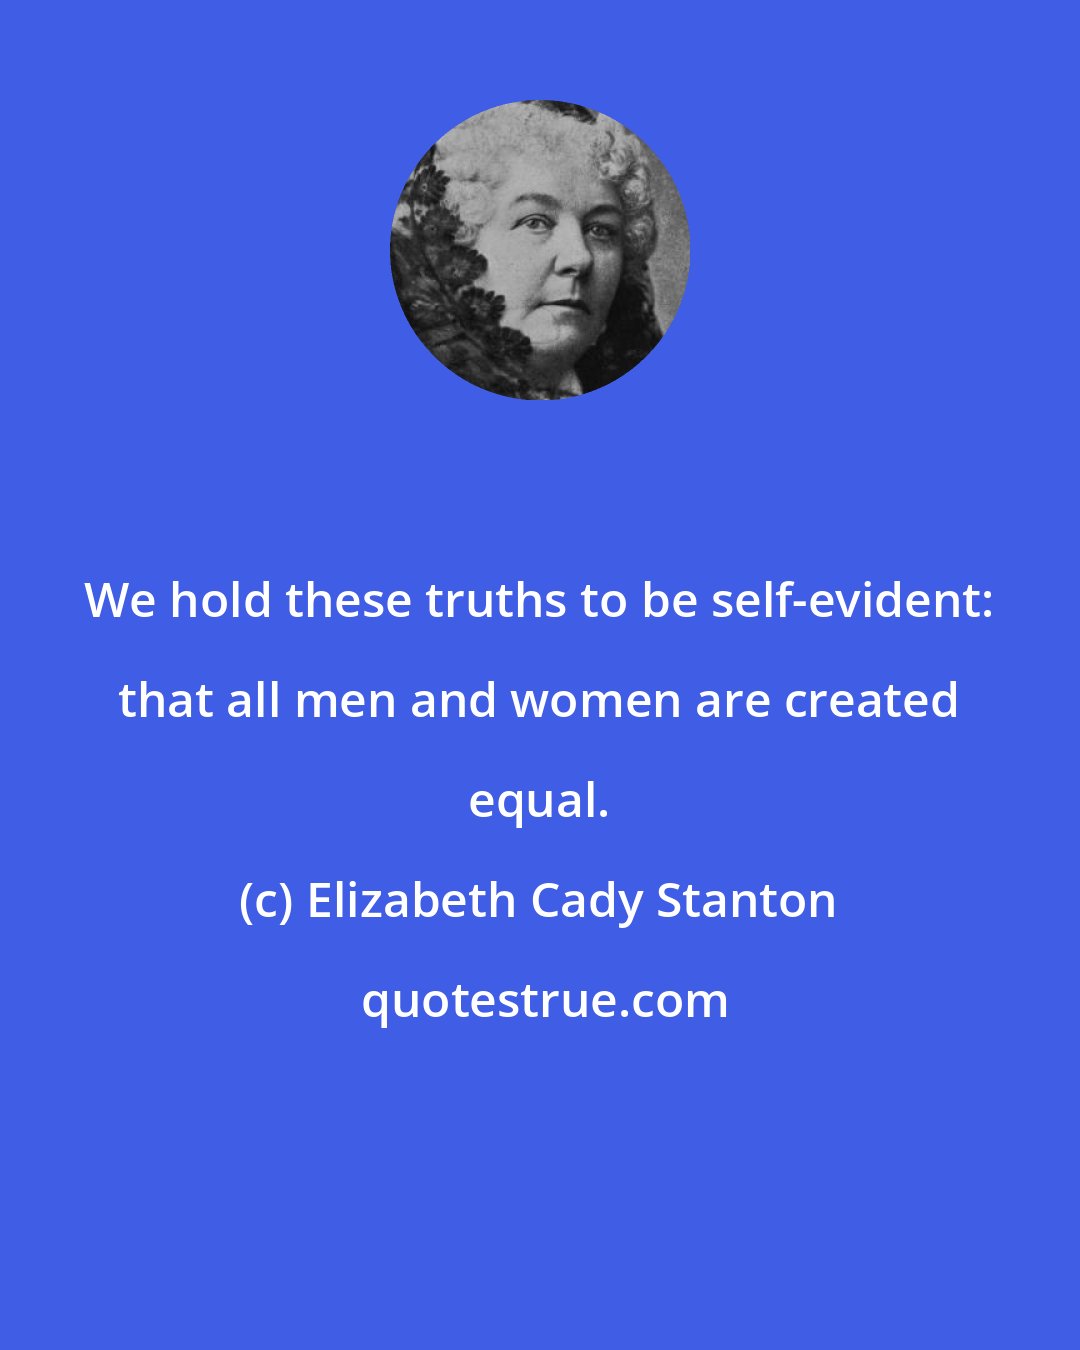 Elizabeth Cady Stanton: We hold these truths to be self-evident: that all men and women are created equal.